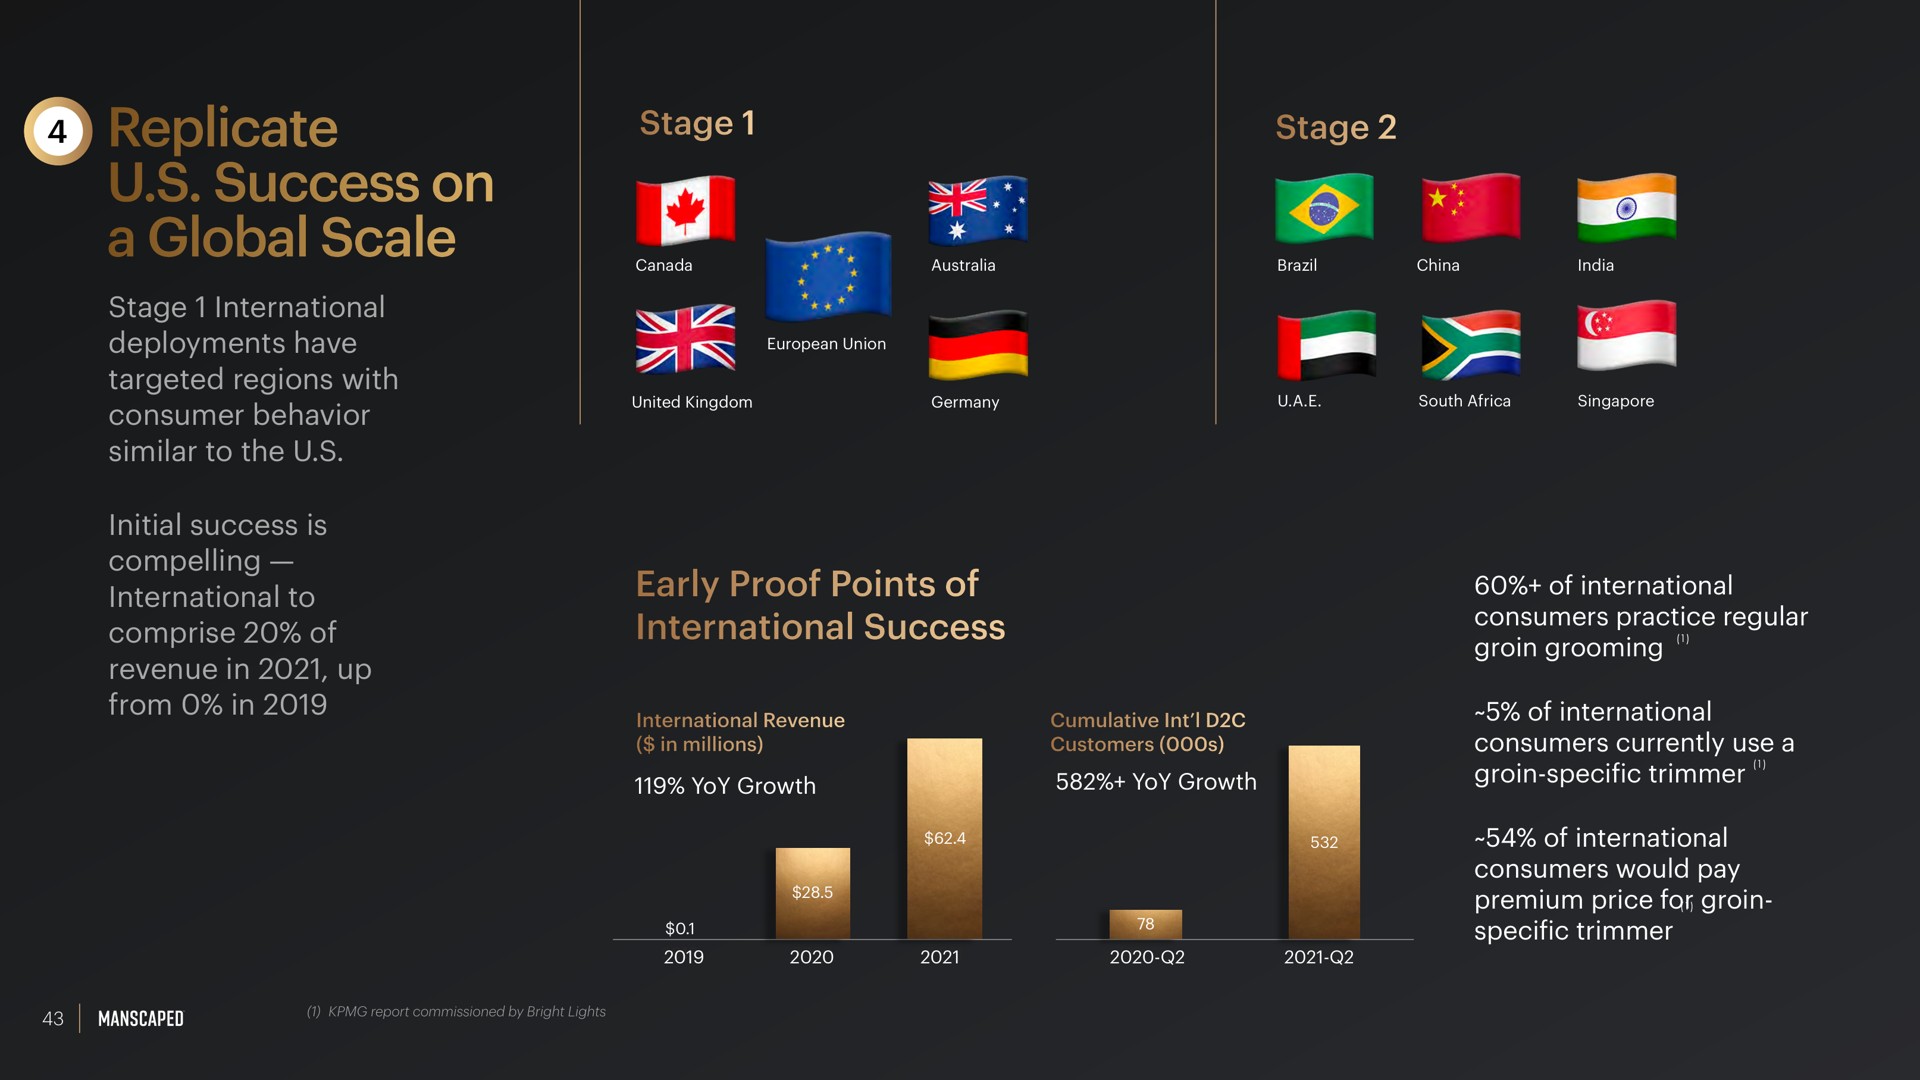 replicate success on a global scale stage stage early proof points of international success plicate | Manscaped